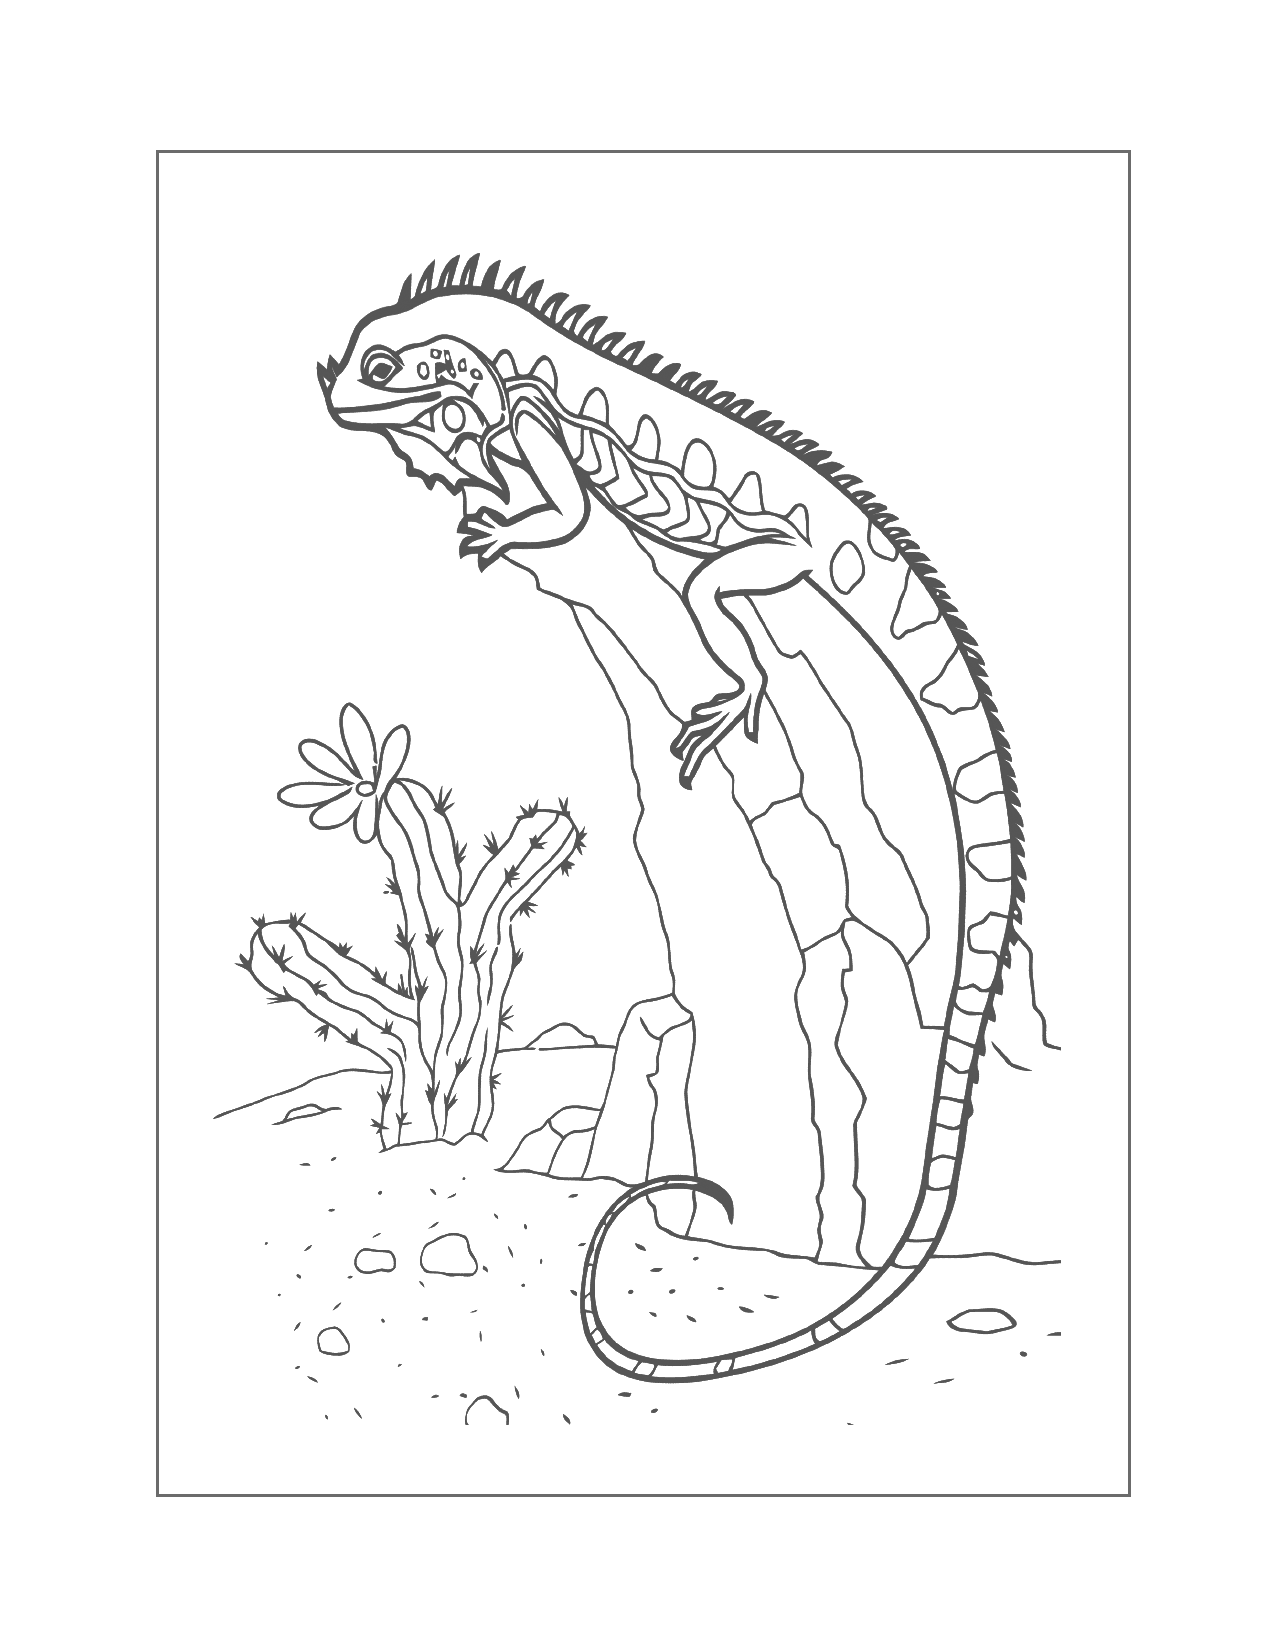 Lizard On A Rock Coloring Page